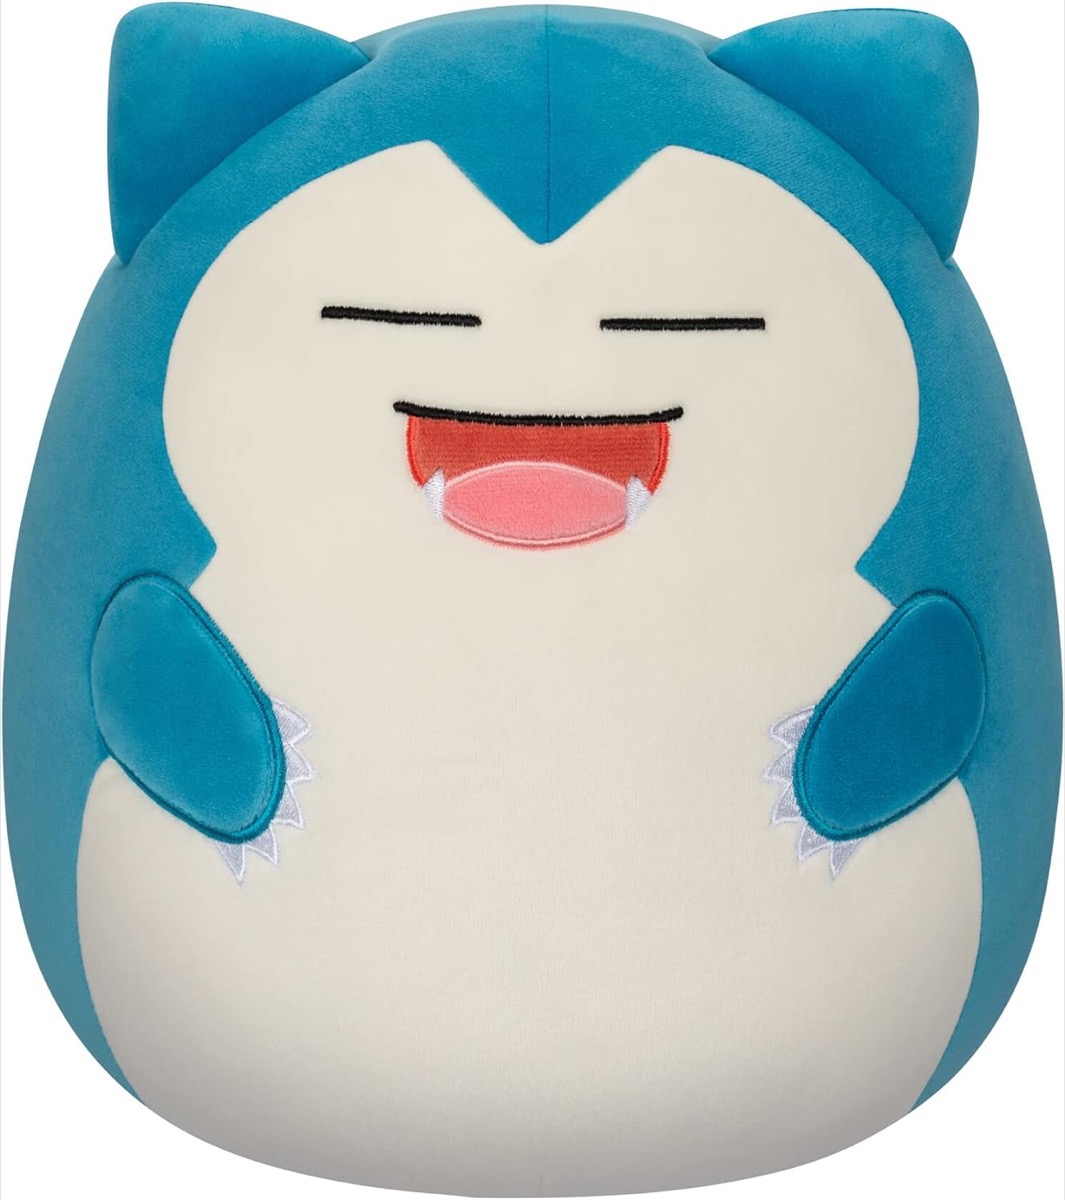 A plushie of Snorlax from "Pokemon"